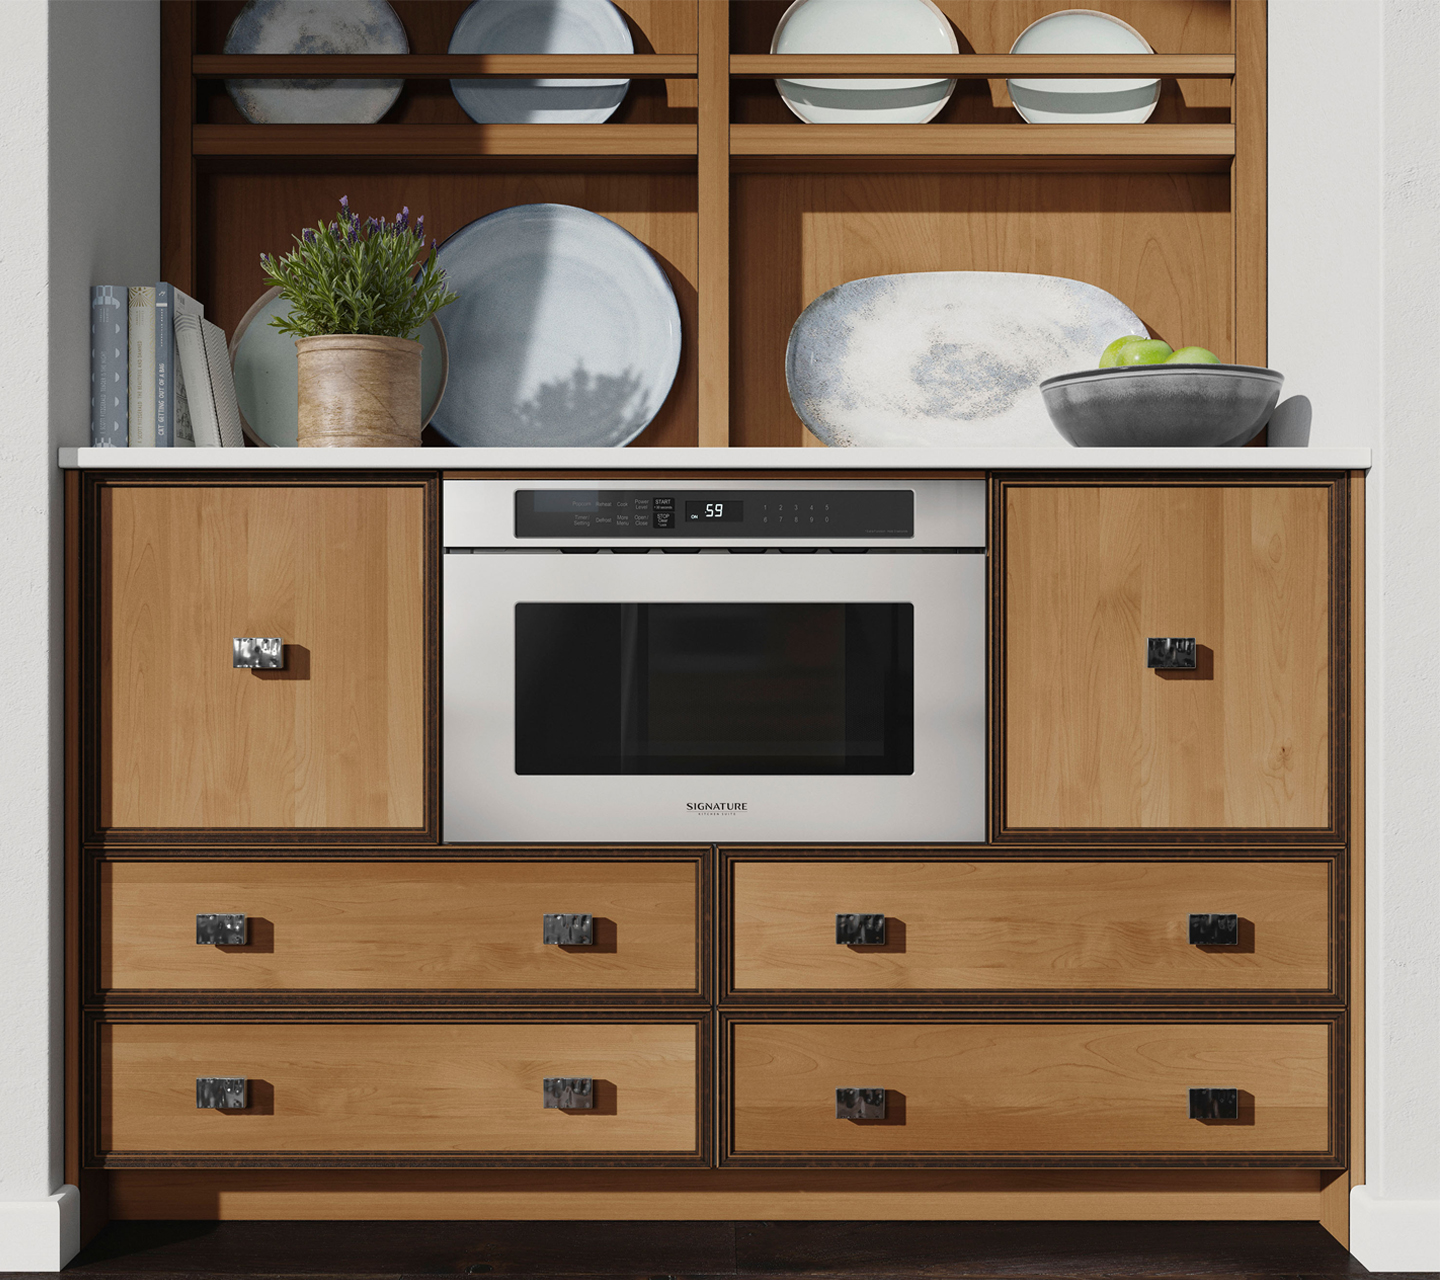 Signature Kitchen Suite Microwave Oven Drawer